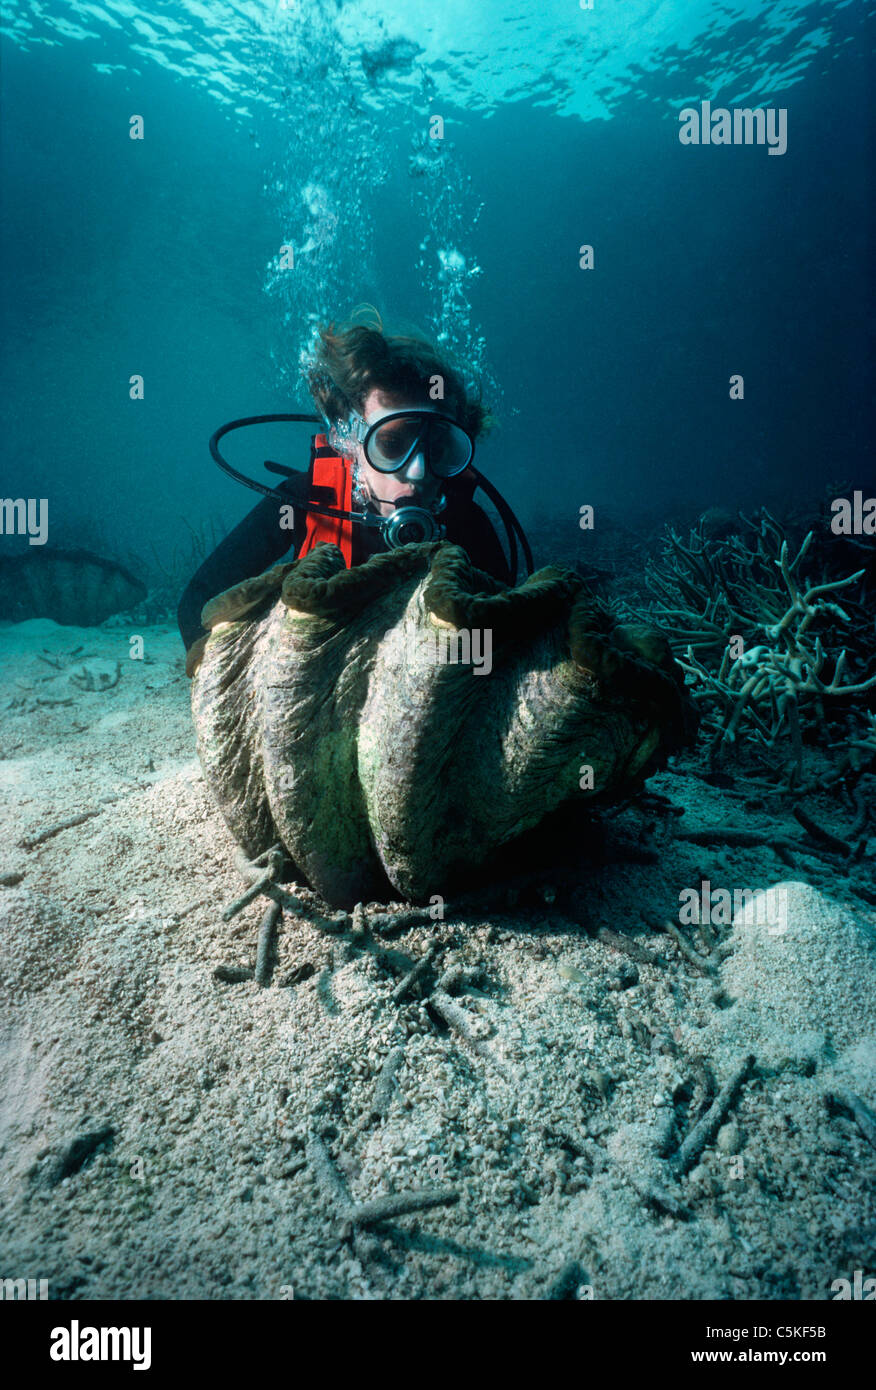 Diver examining a Giant Fluted Clam (Tridacna squamosa) on a coral reef. Palau, Micronesia - Pacific Ocean Stock Photo